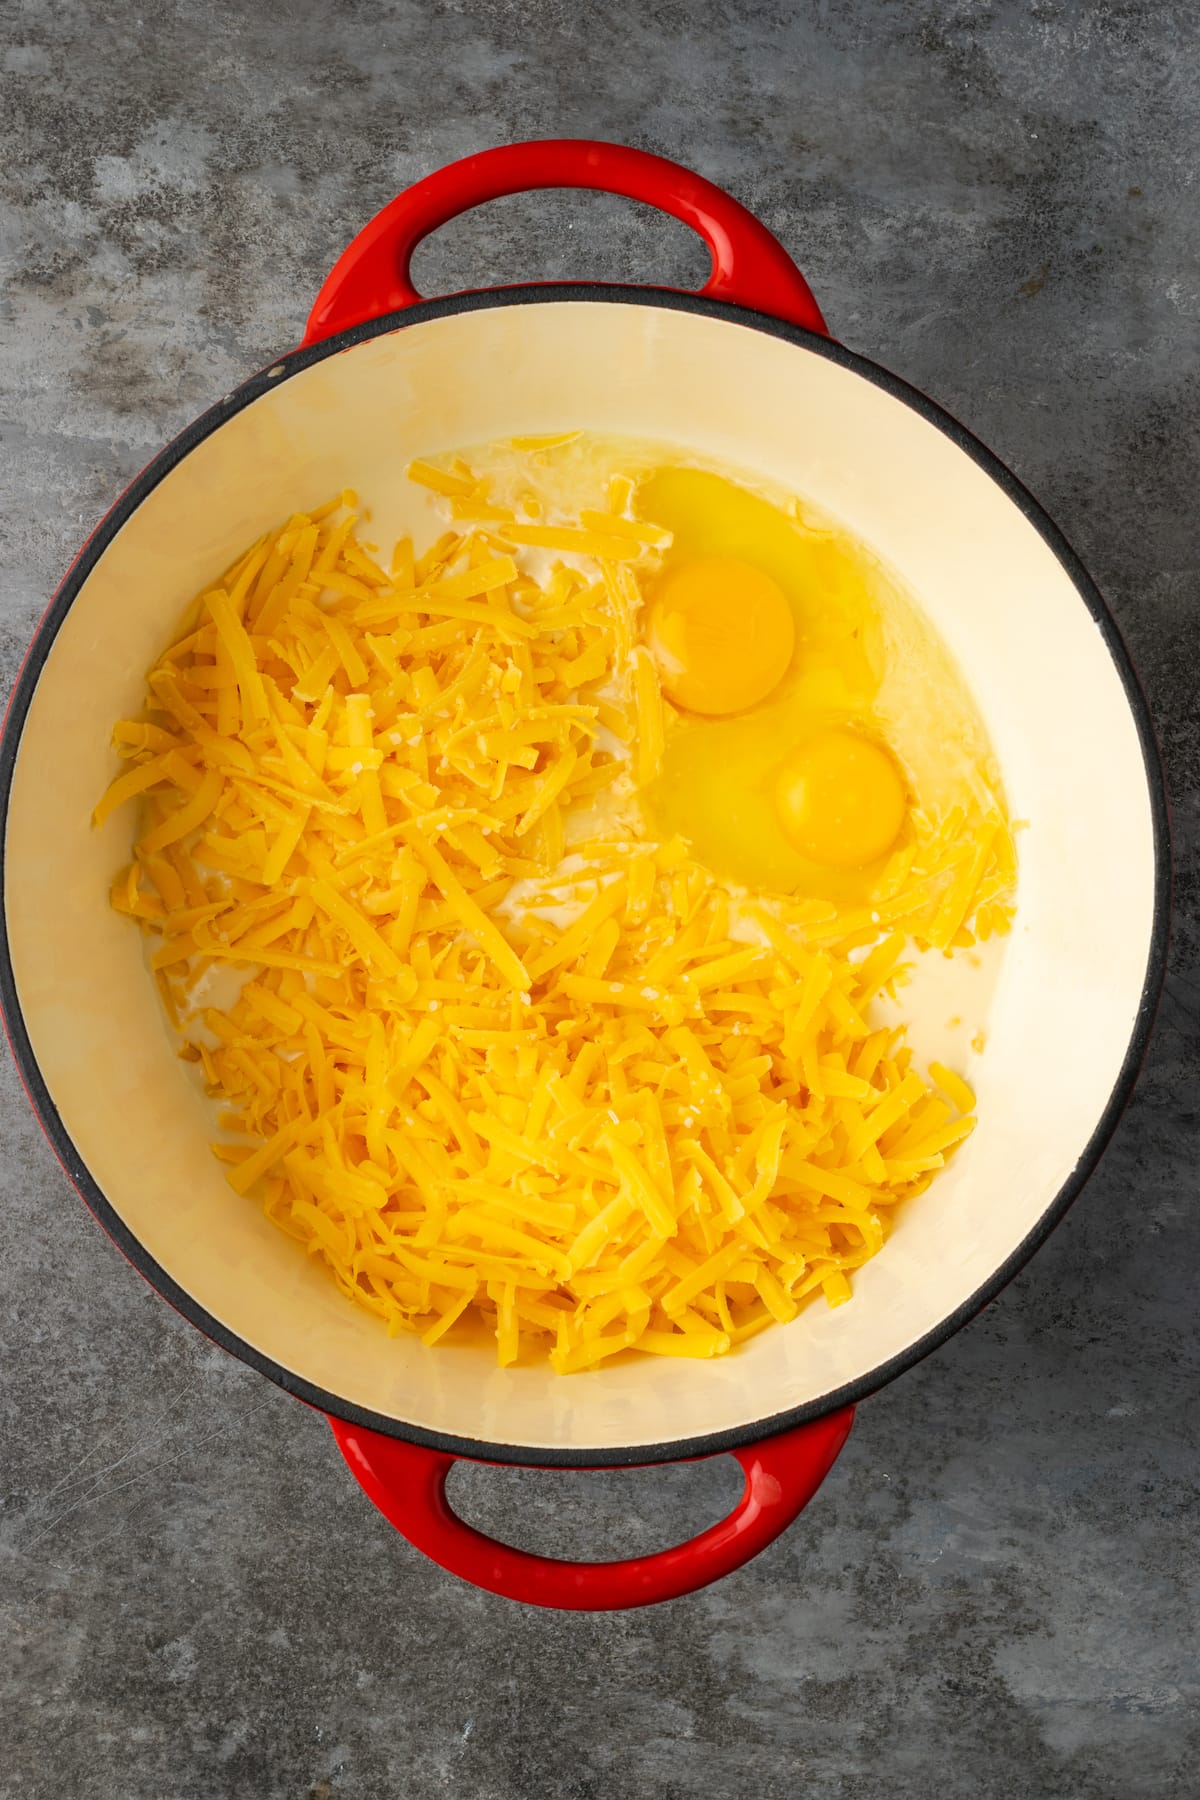 Grated cheddar cheese, eggs, and sauce ingredients combined in a large pot.